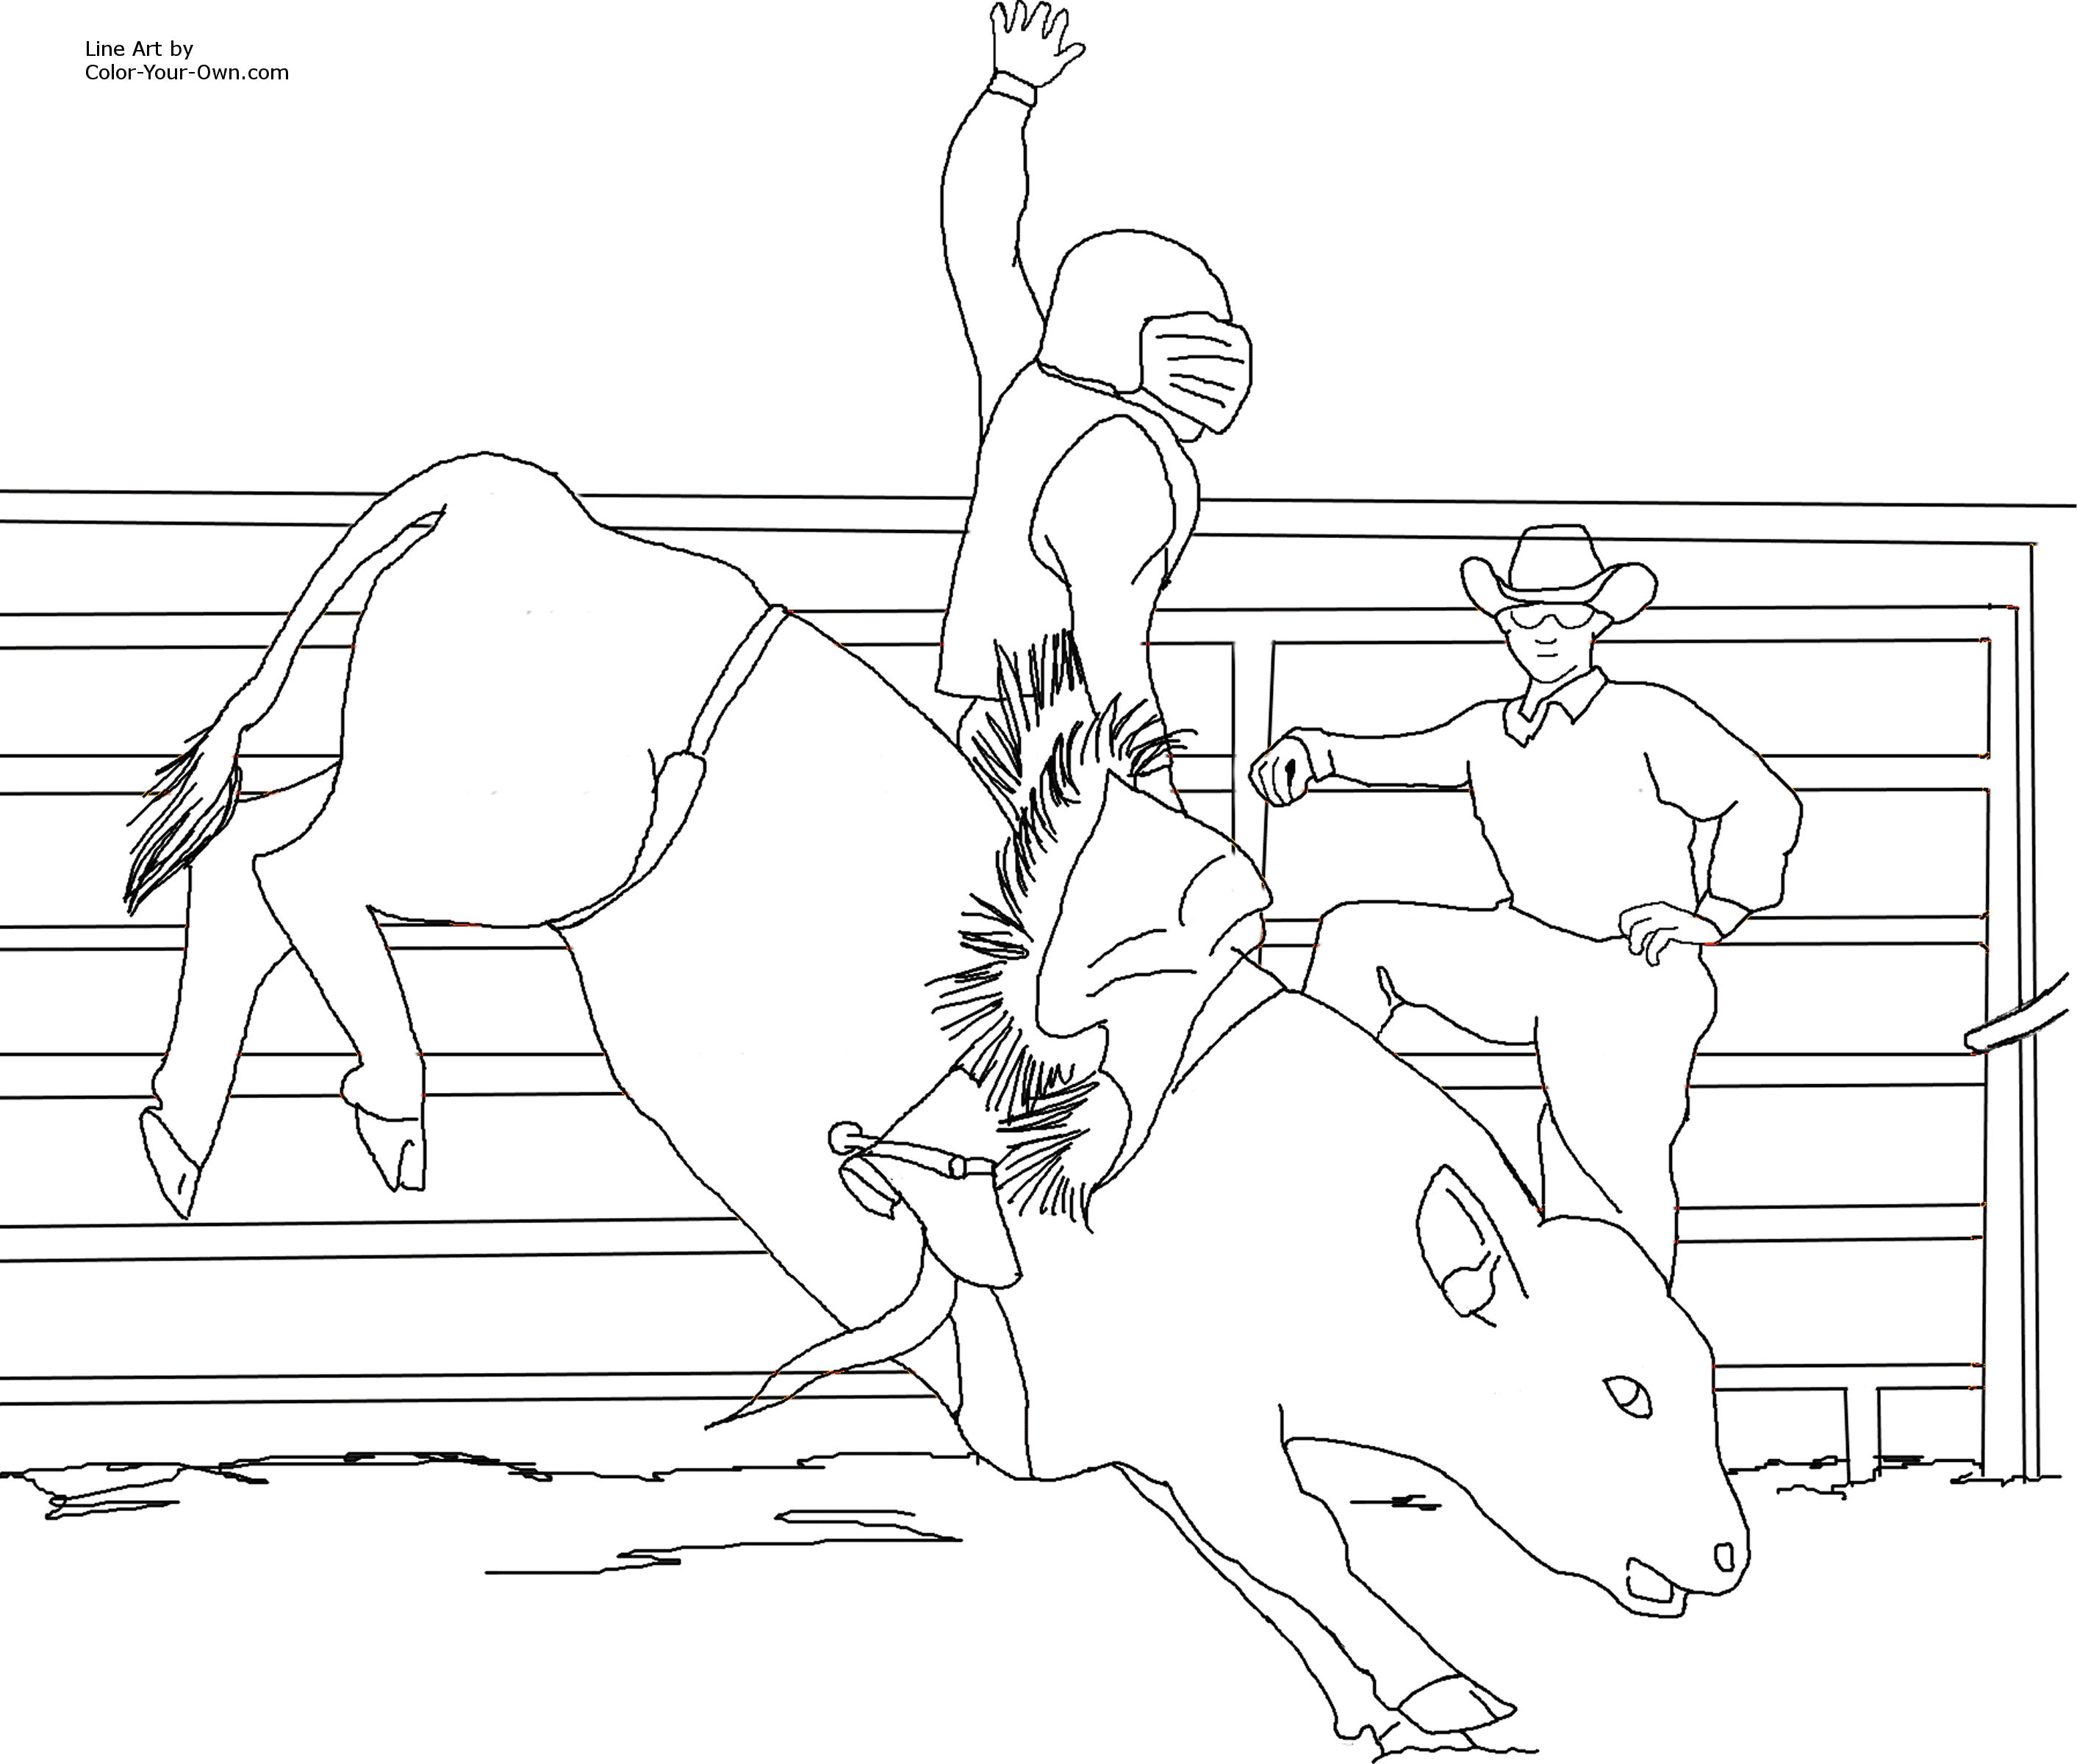 Bull Riding - Coloring Pages for Kids and for Adults